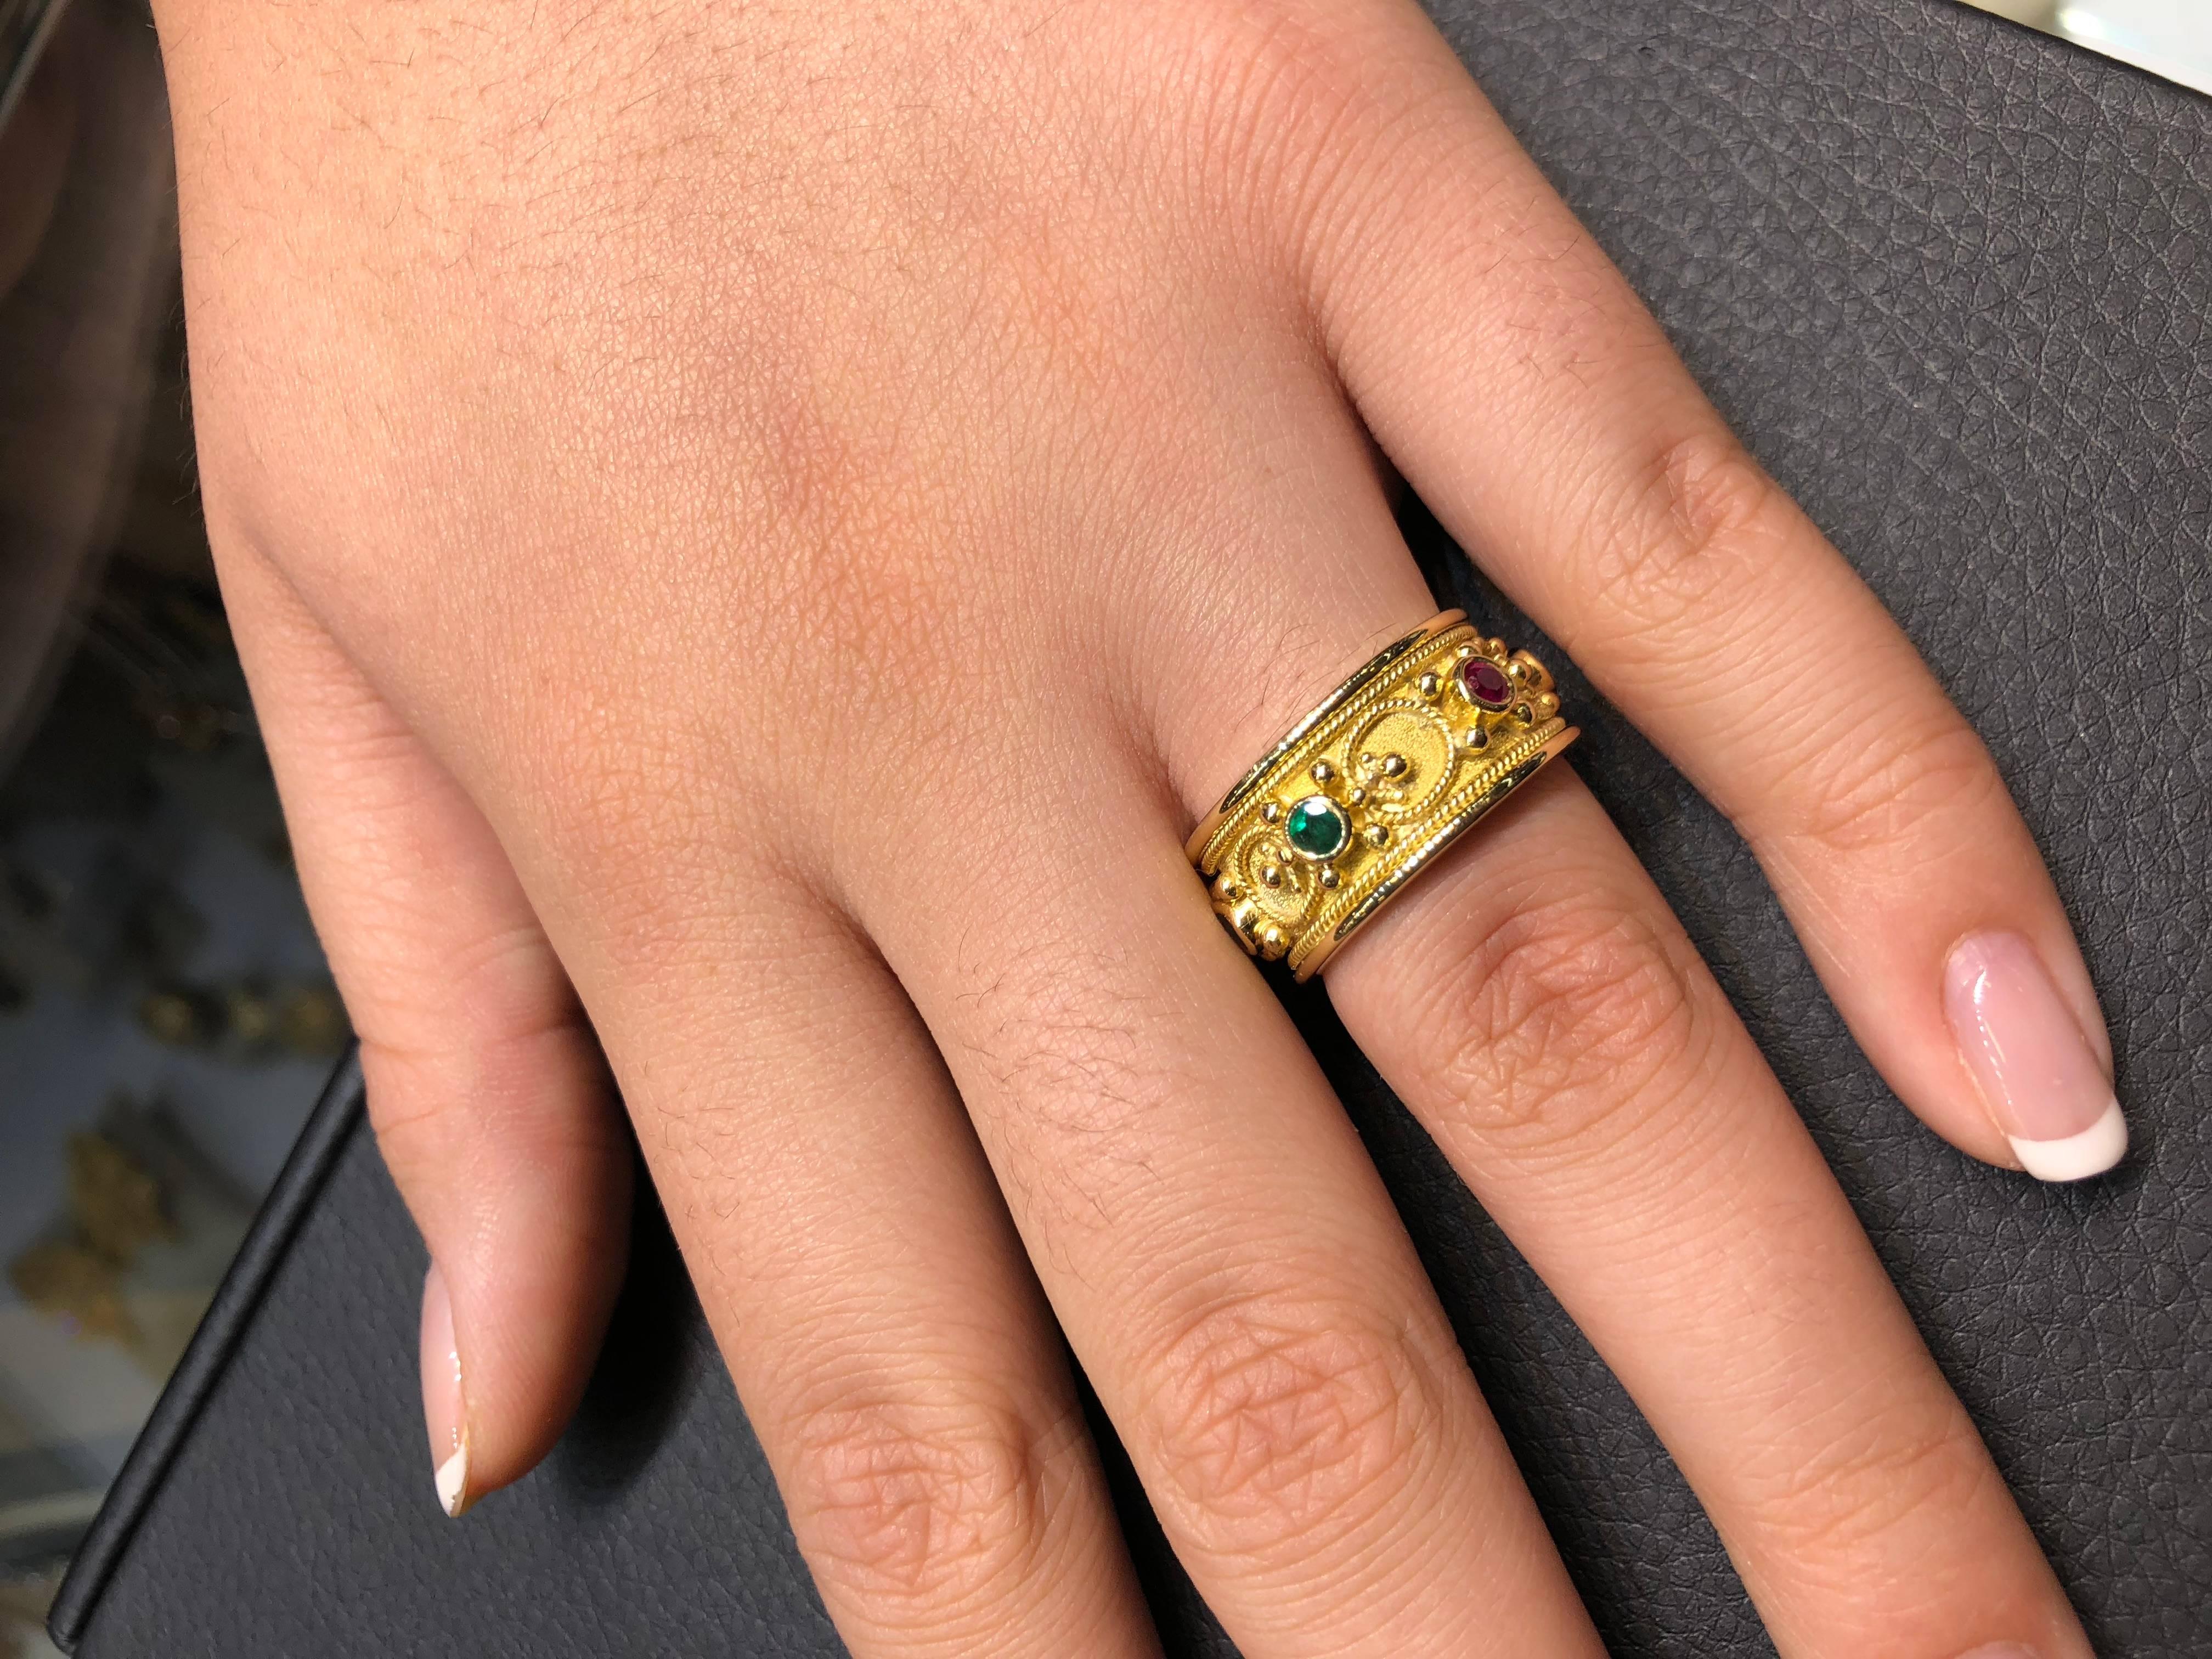 S.Georgios design Ring handmade from solid 18 Karat Yellow Gold. The Ring is microscopically decorated - granulation work - all the way around with gold beads and wires shaped like the last letter of Greek Alphabet - Omega, which symbolizes eternal